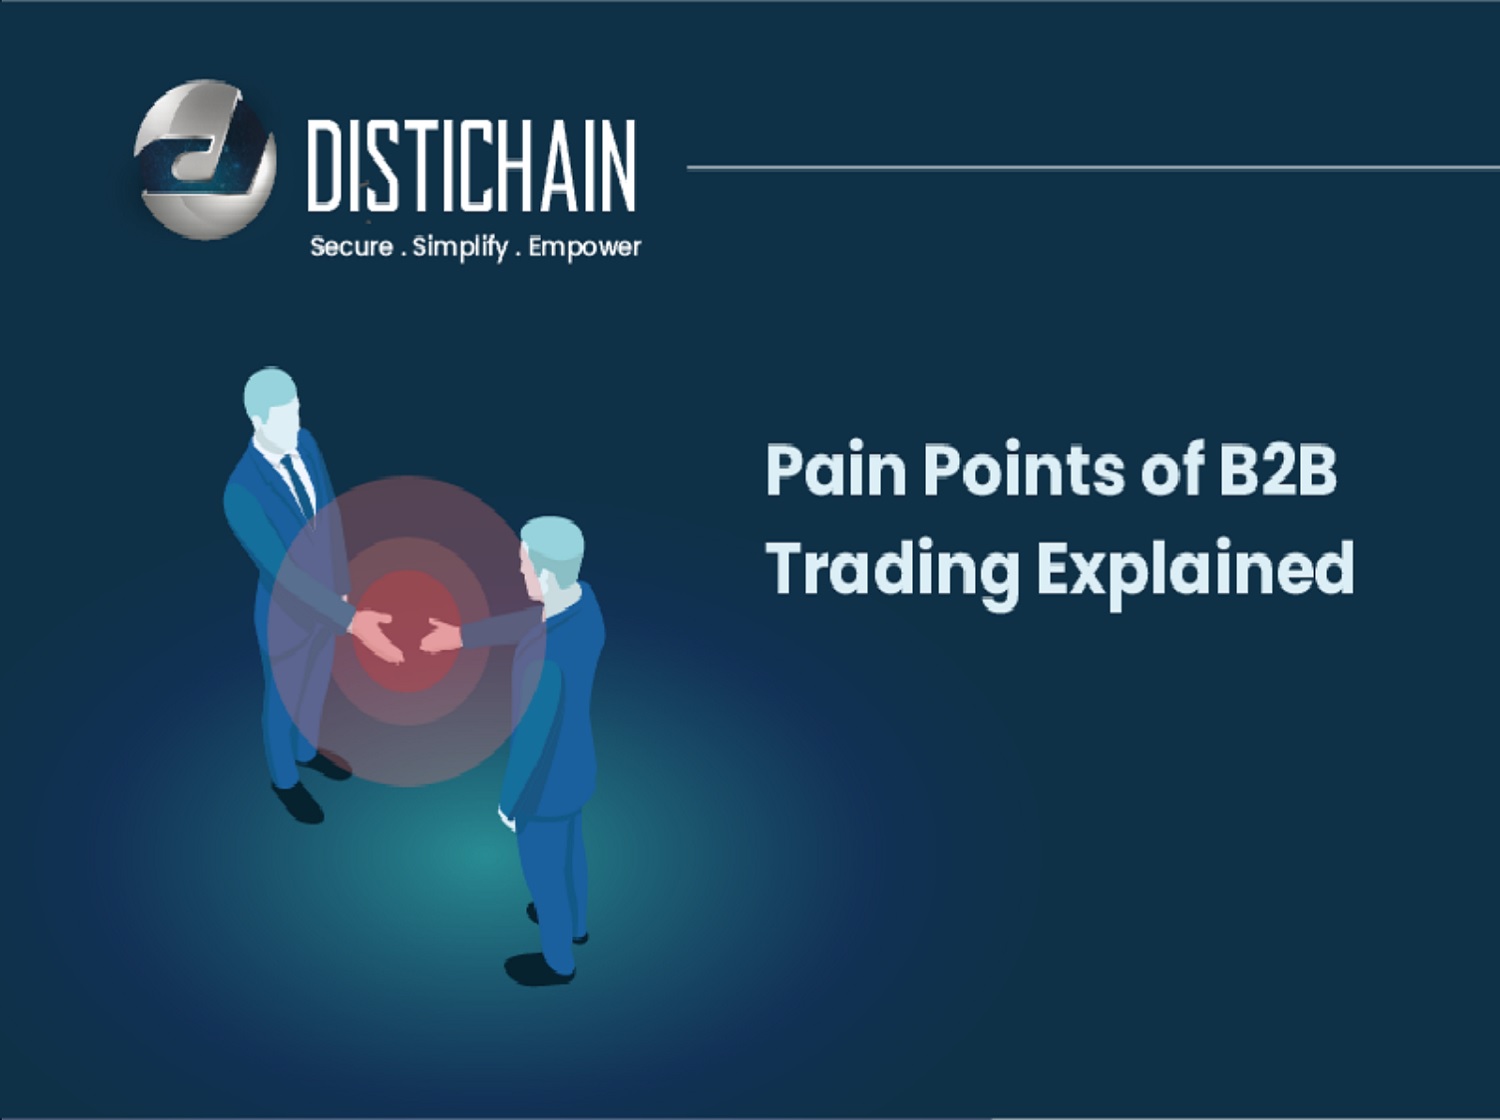 Distichain Pain Points of B2B Trading Explained